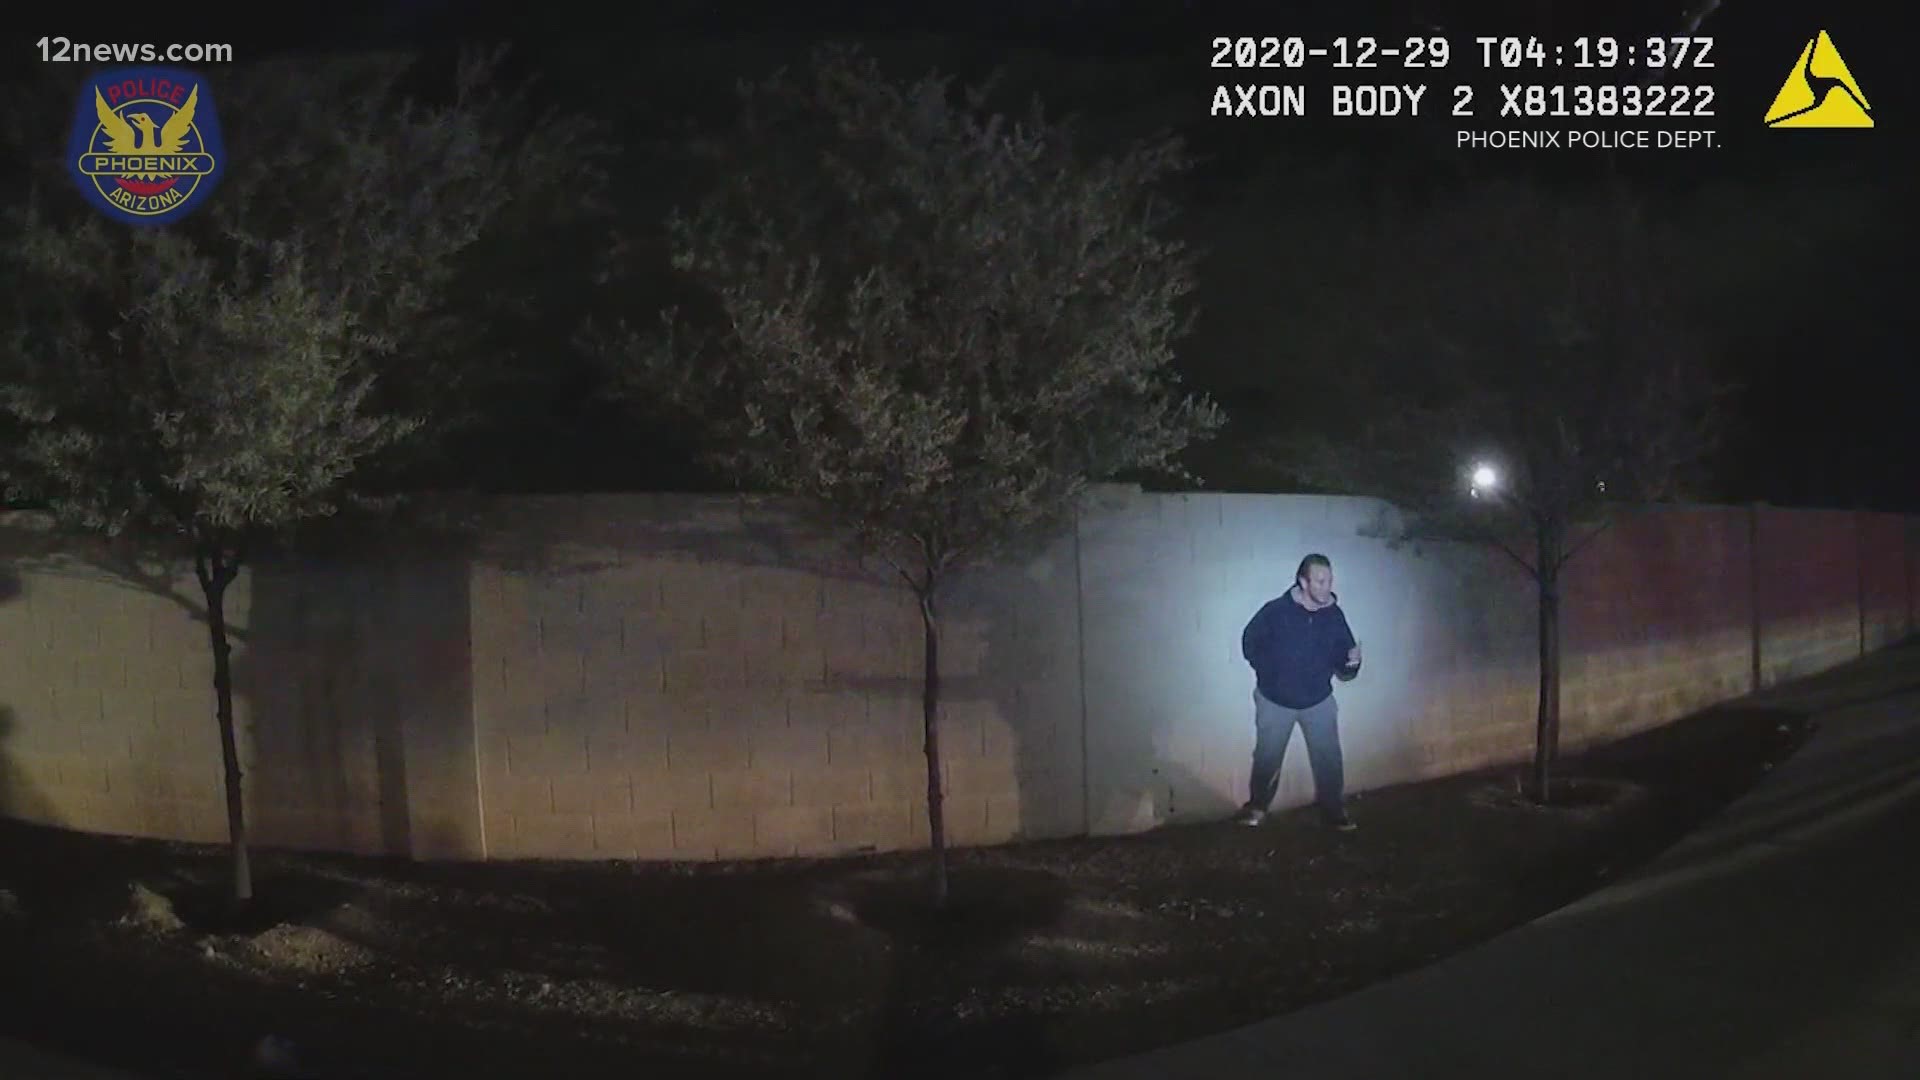 Newly released bodycam video shows a suspect screaming at Phoenix police officers and motioning as if he had a gun before he was shot last month.